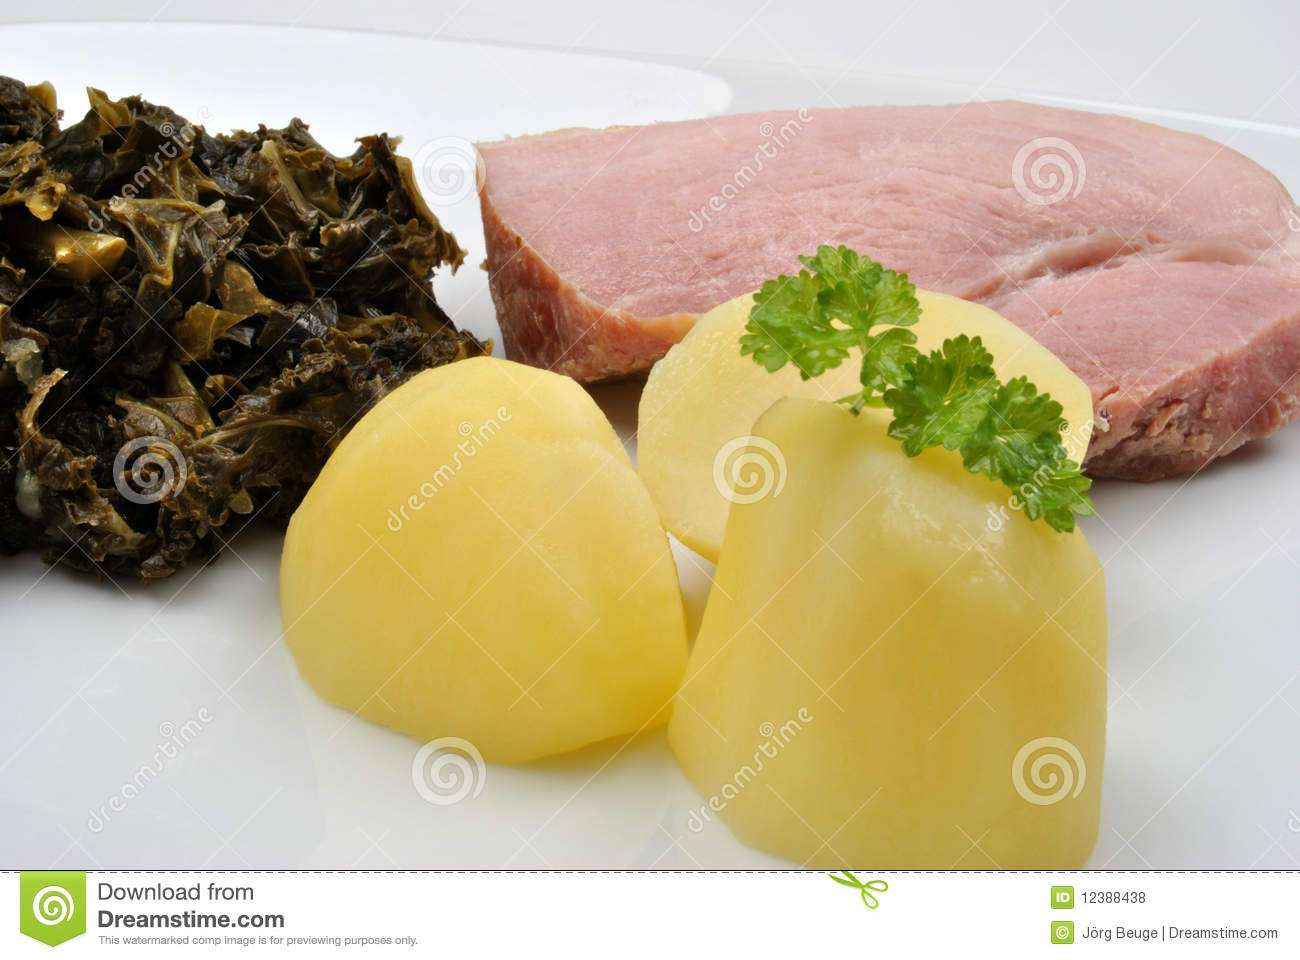 Kale With Cooked Potato And Meat Royalty Free Stock Photos   Image    